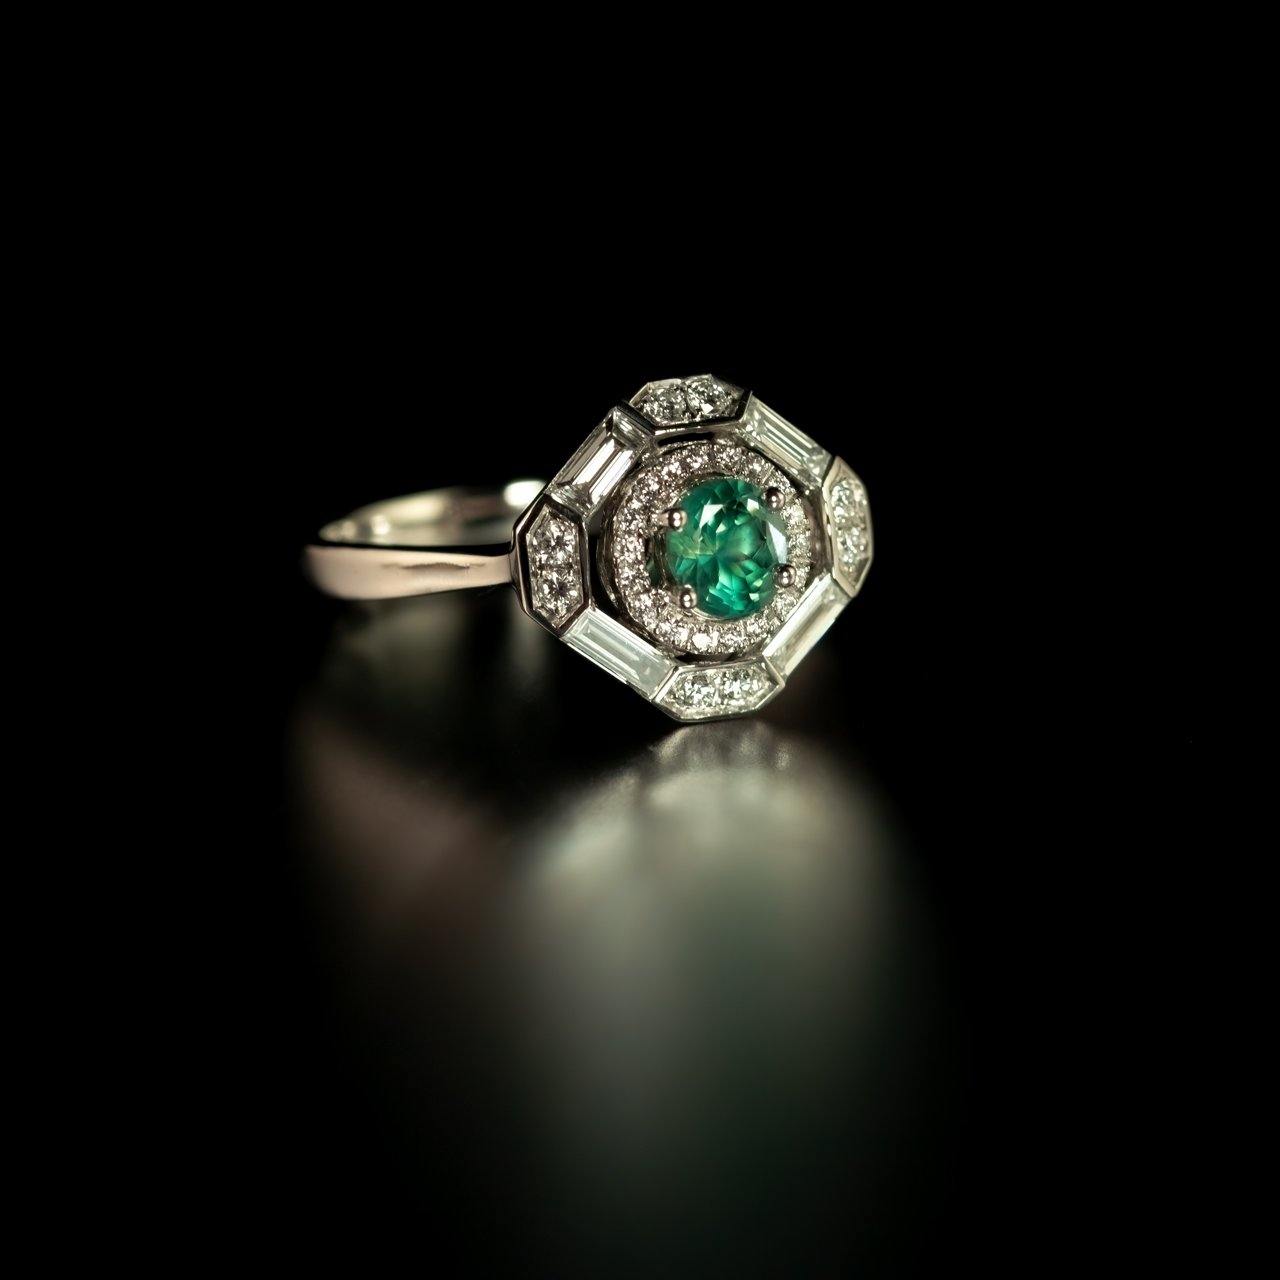 A platinum ring featuring a 0.60ct alexandrite stone, styled in an art deco design